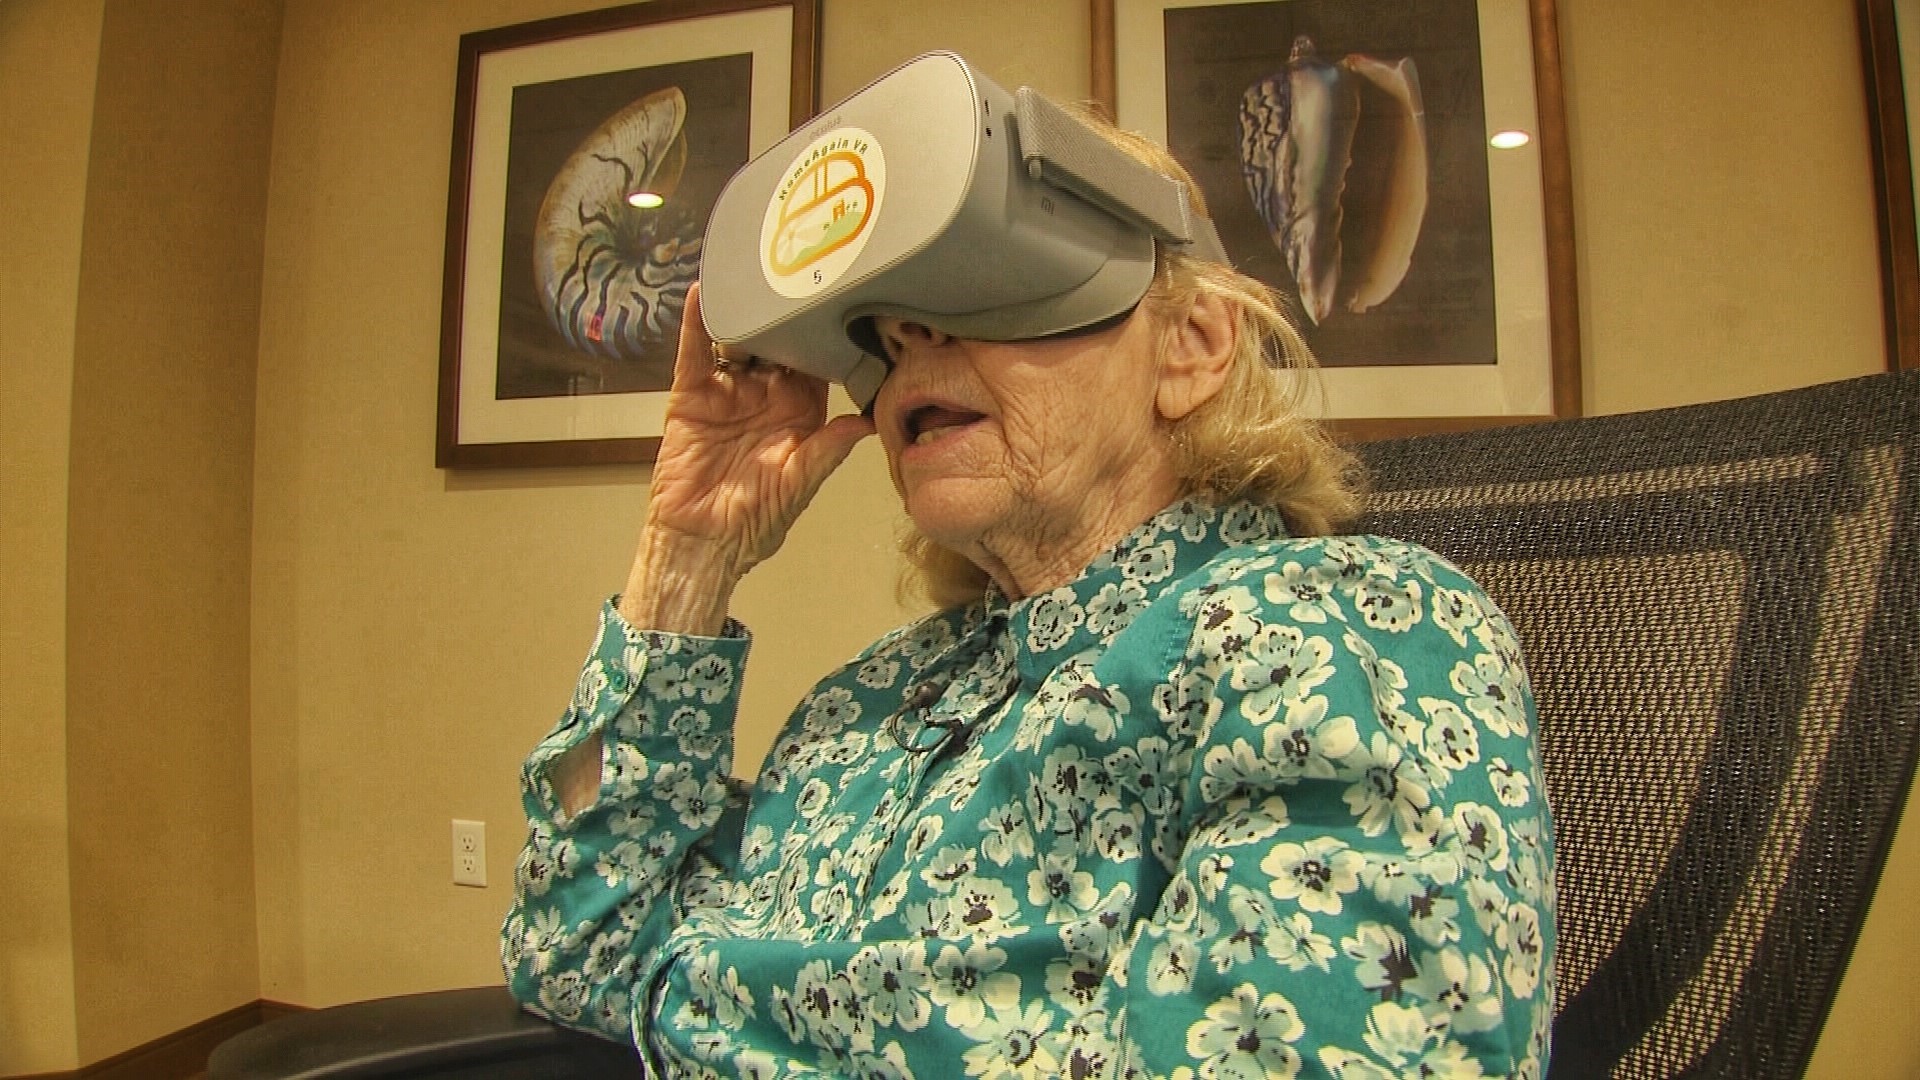 Many seniors shy away from new technology. But a local nonprofit is showing seniors some tech can have a positive effect on them.